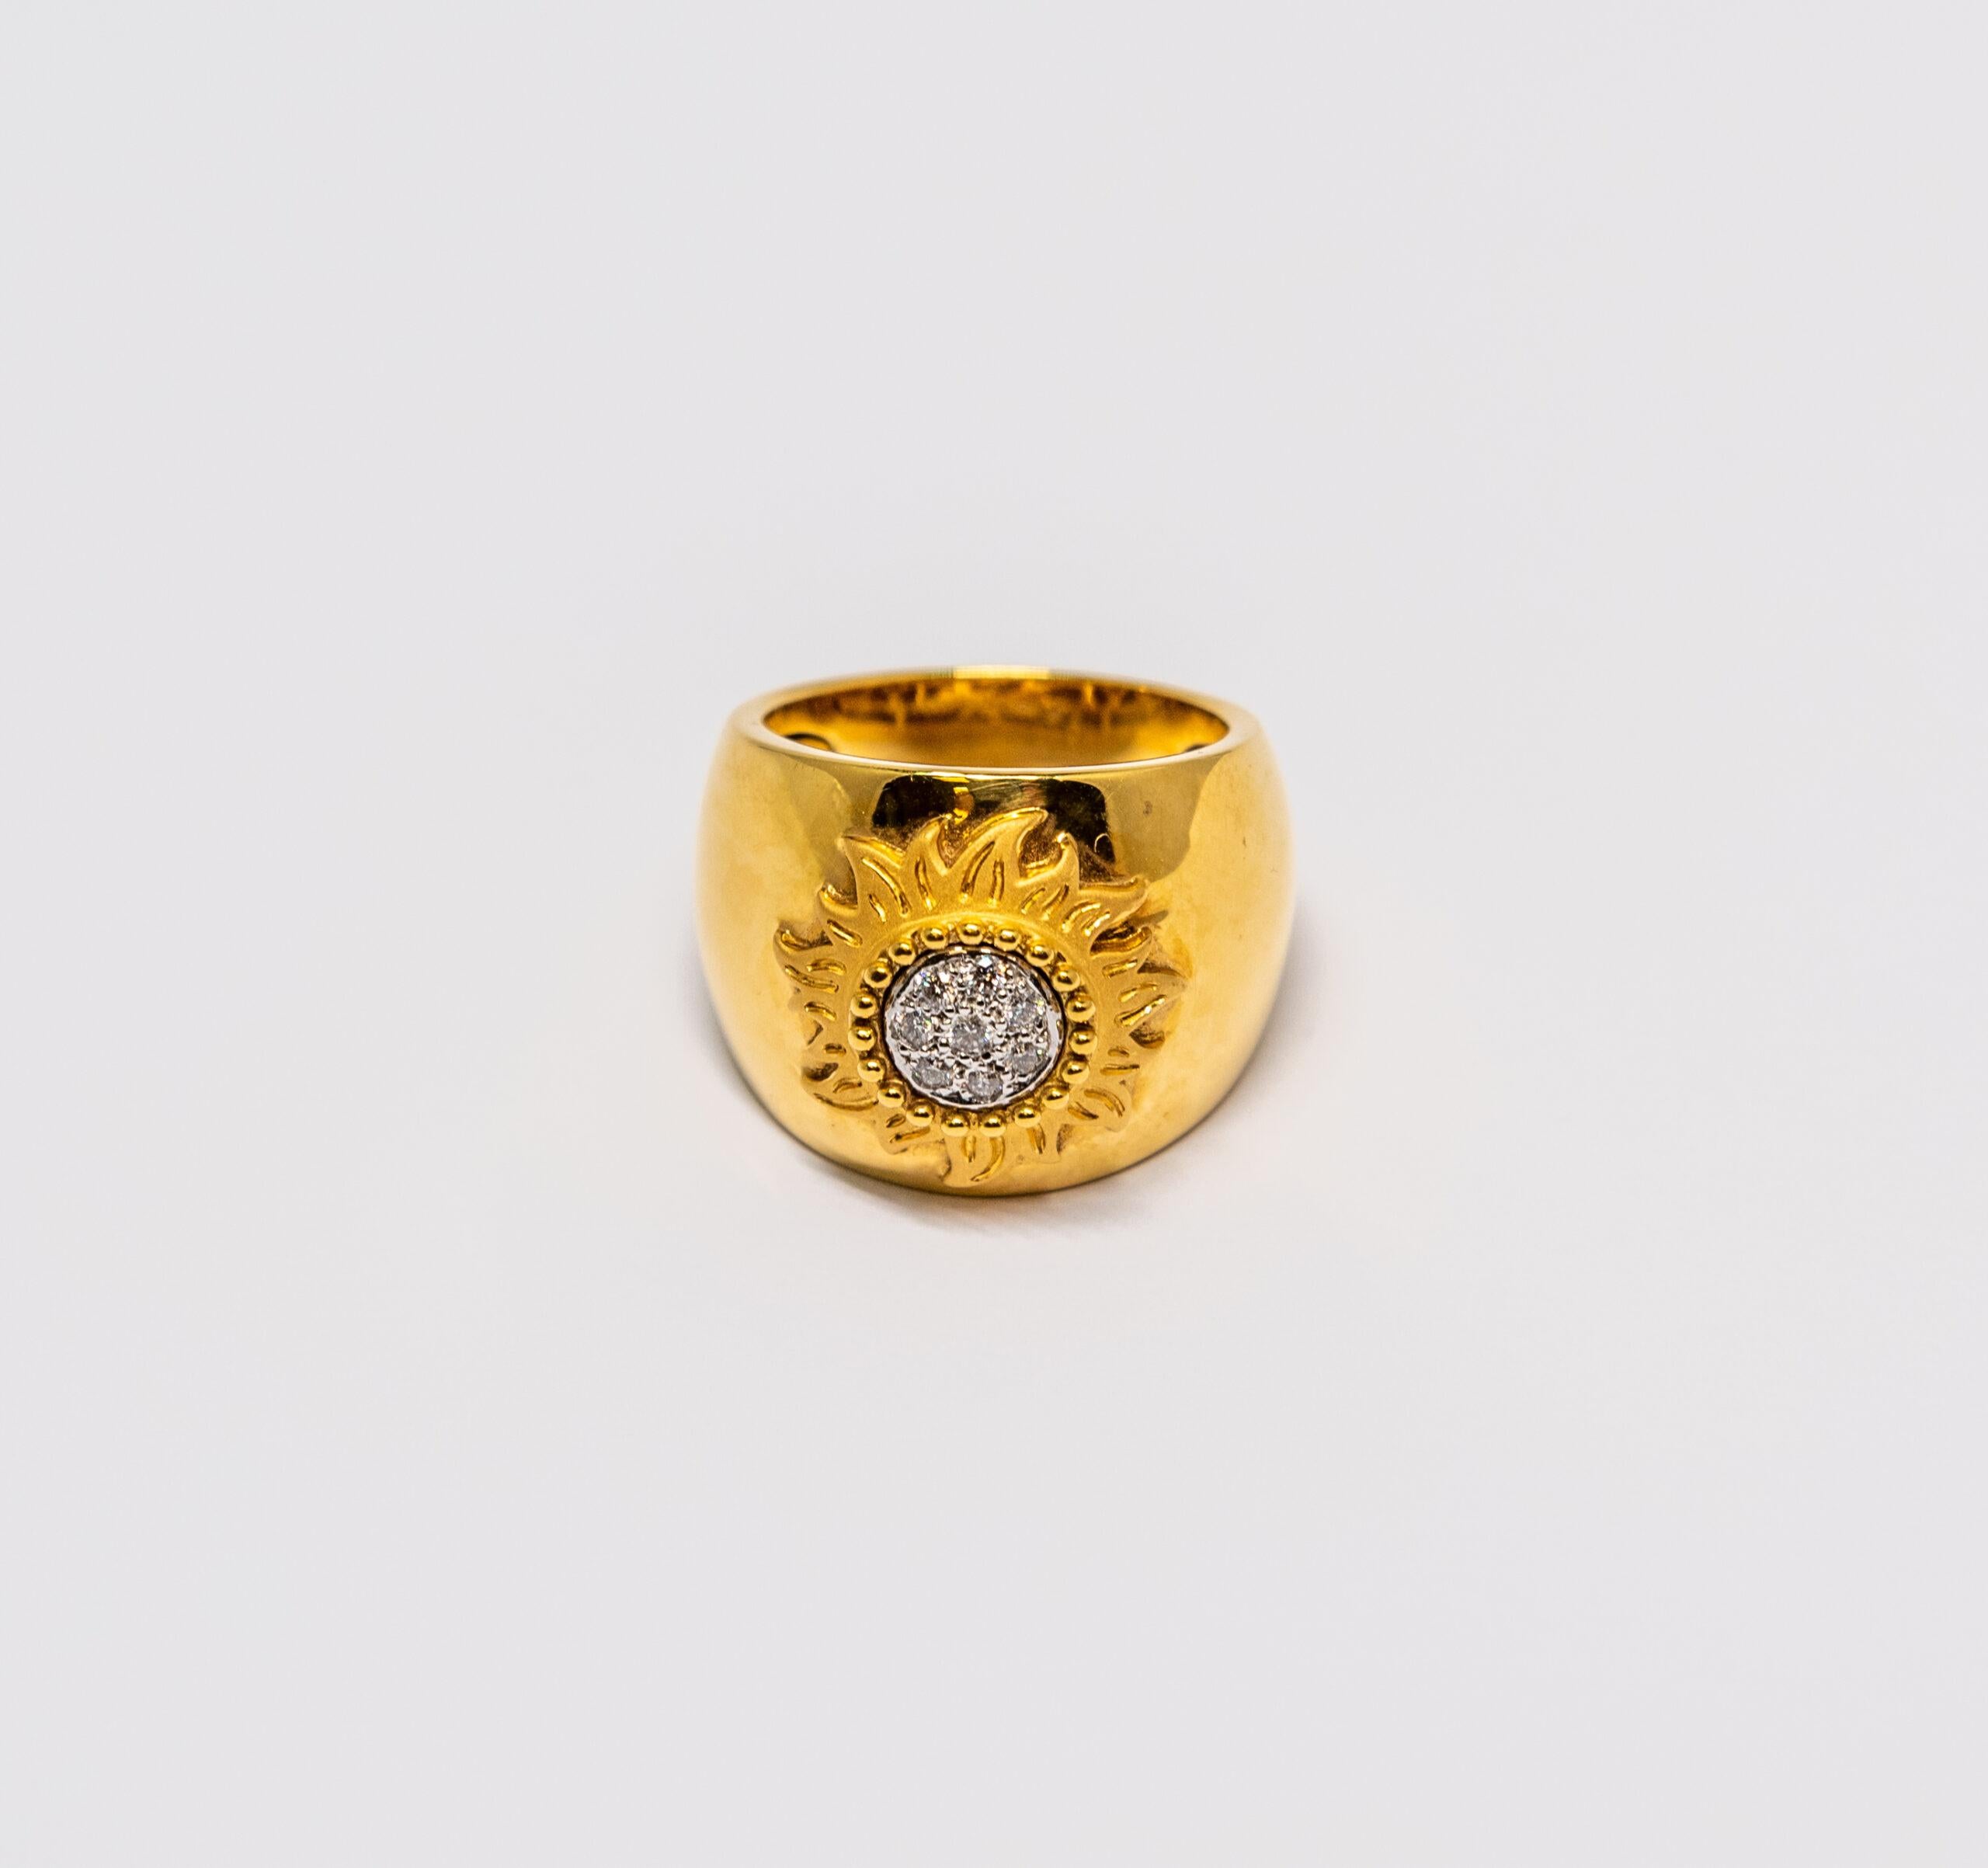 This ring is made of 18K Yellow Gold. It is decorated with floral pattern and set with 8 Diamond (~0.15ct).

Size – 55 (7 US)